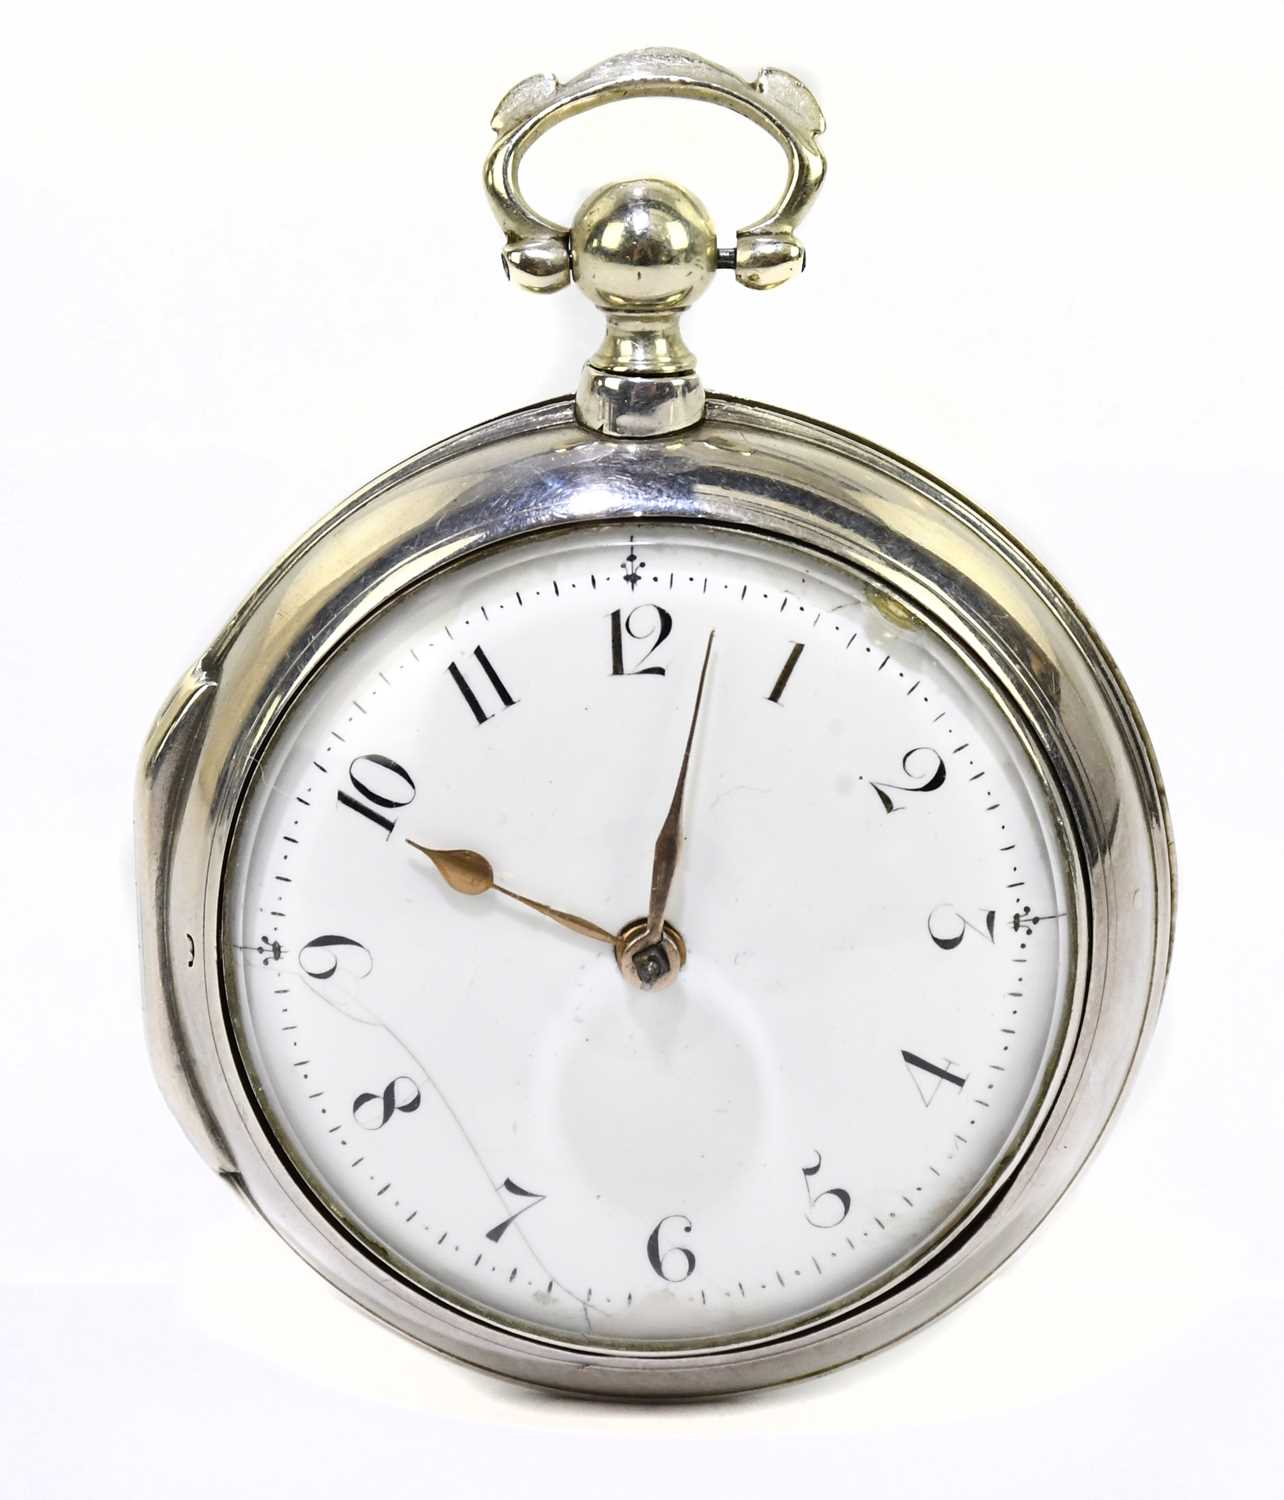 J. SNELLING, ALTON; a William IV hallmarked silver key wind pair cased open face pocket watch, the